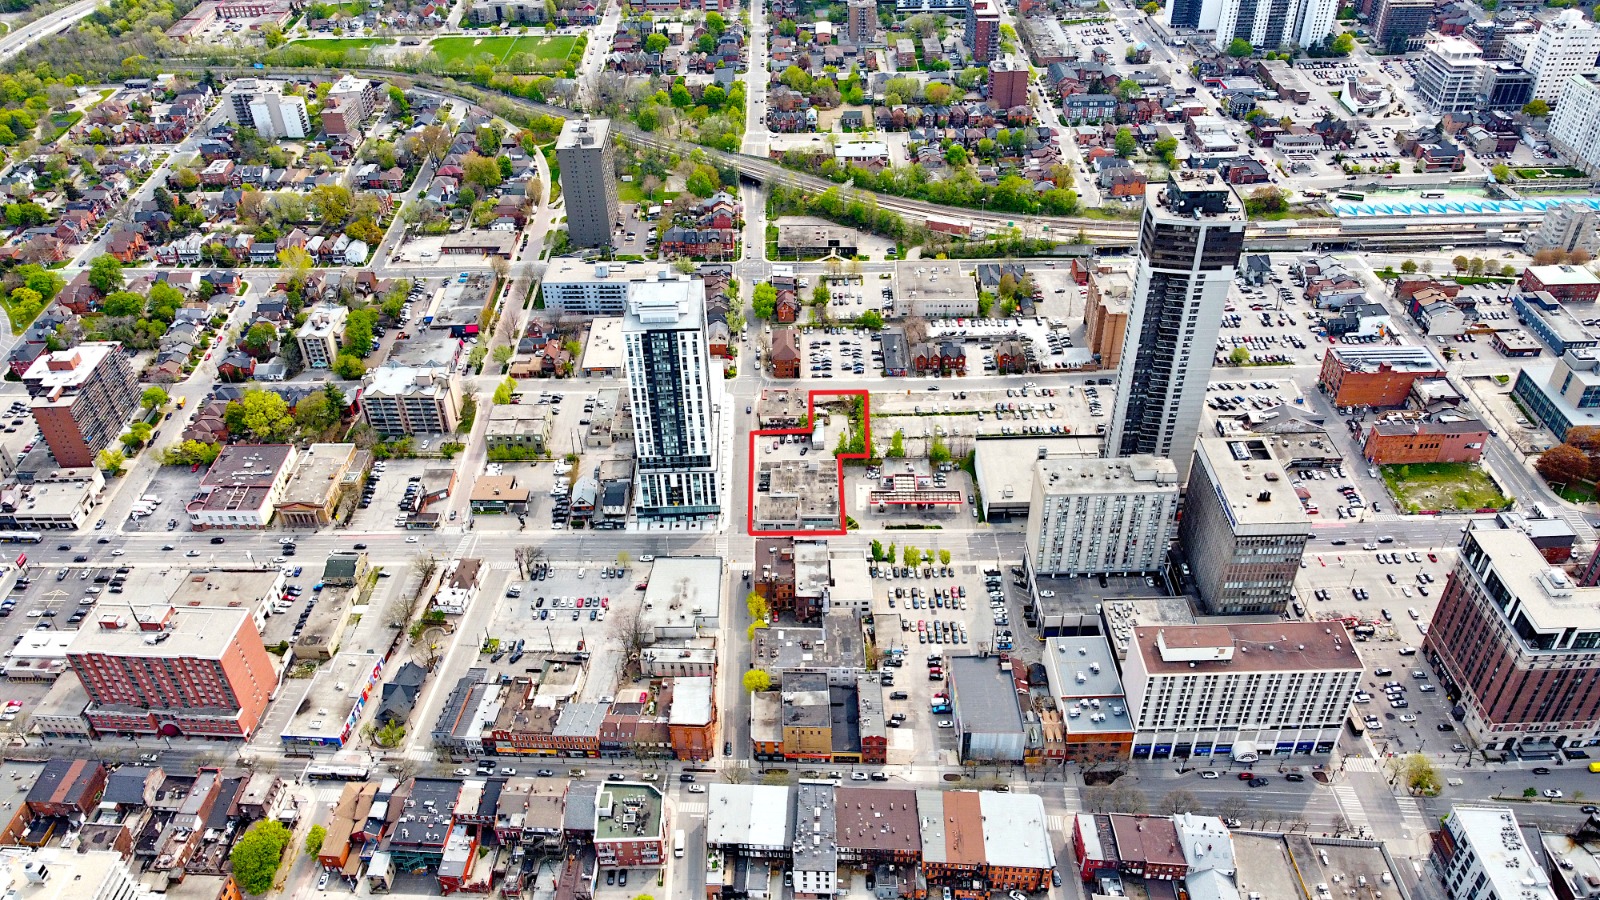 Mixed Use Development in Downtown Hamilton on LRT Line